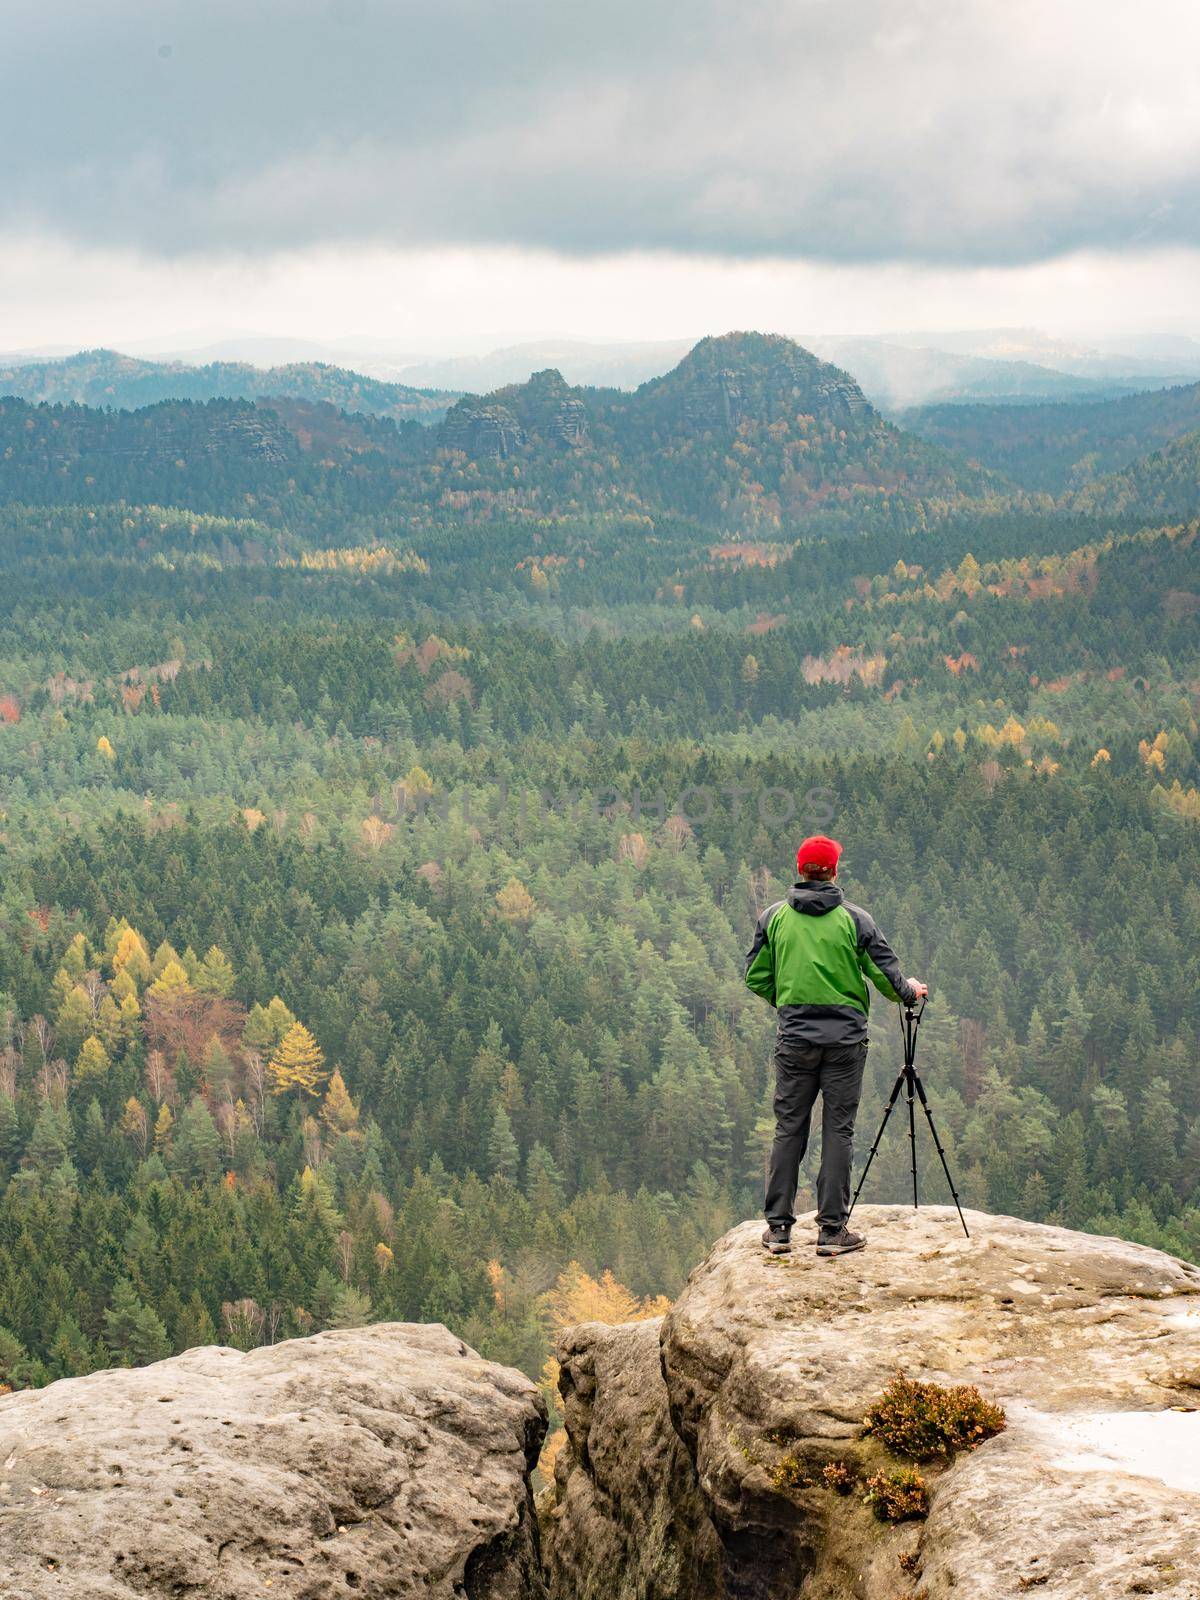 Travel hobby photographer taking picture of misty mountain landscape using professional camera on tripod on stormy, autumn day